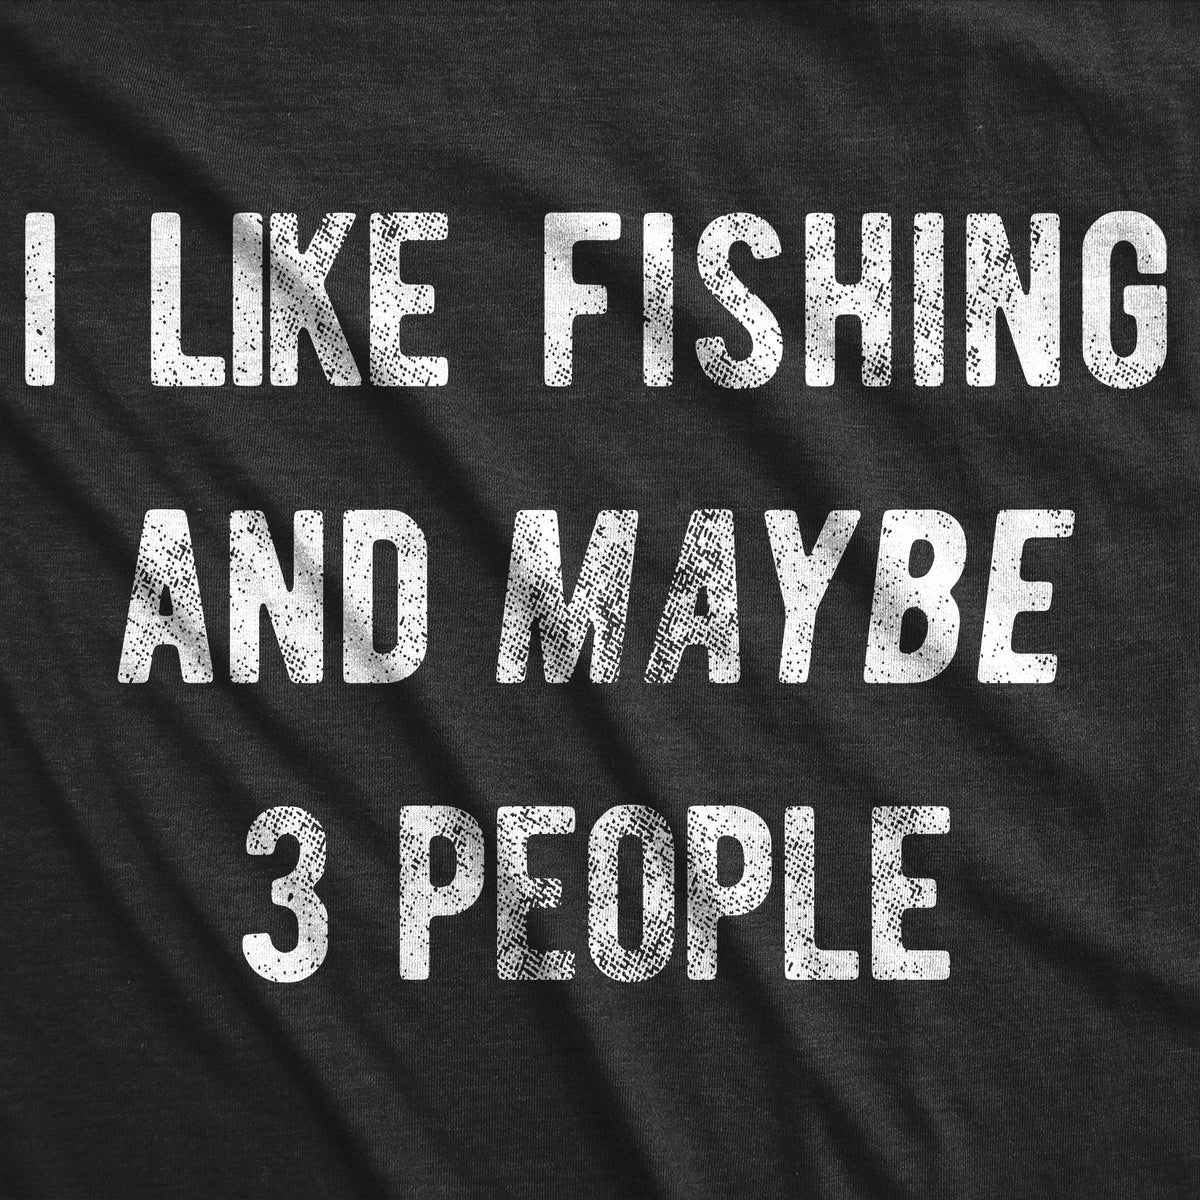 I Like Fishing And Maybe 3 People Men&#39;s T Shirt